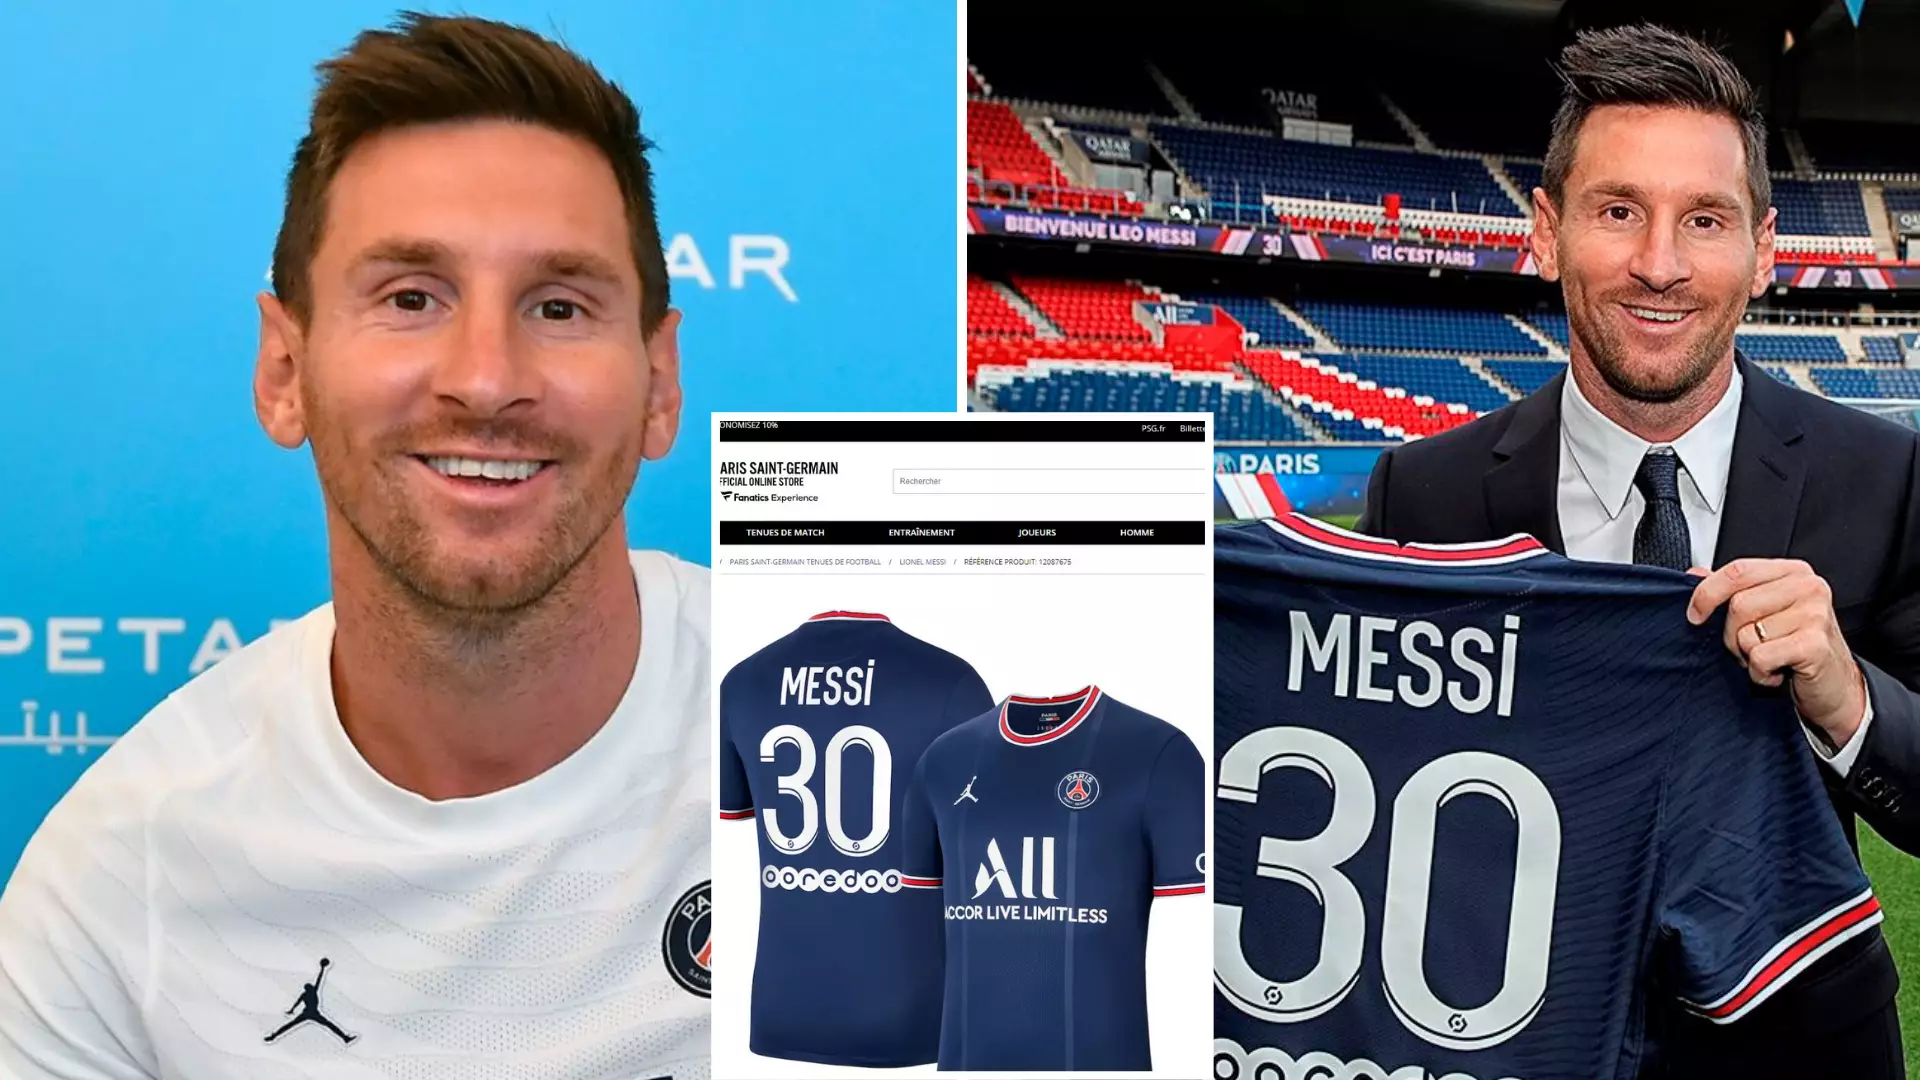 Lionel Messi's PSG Shirt Sold Out Online Only 30 Minutes After Officially Signing For Club